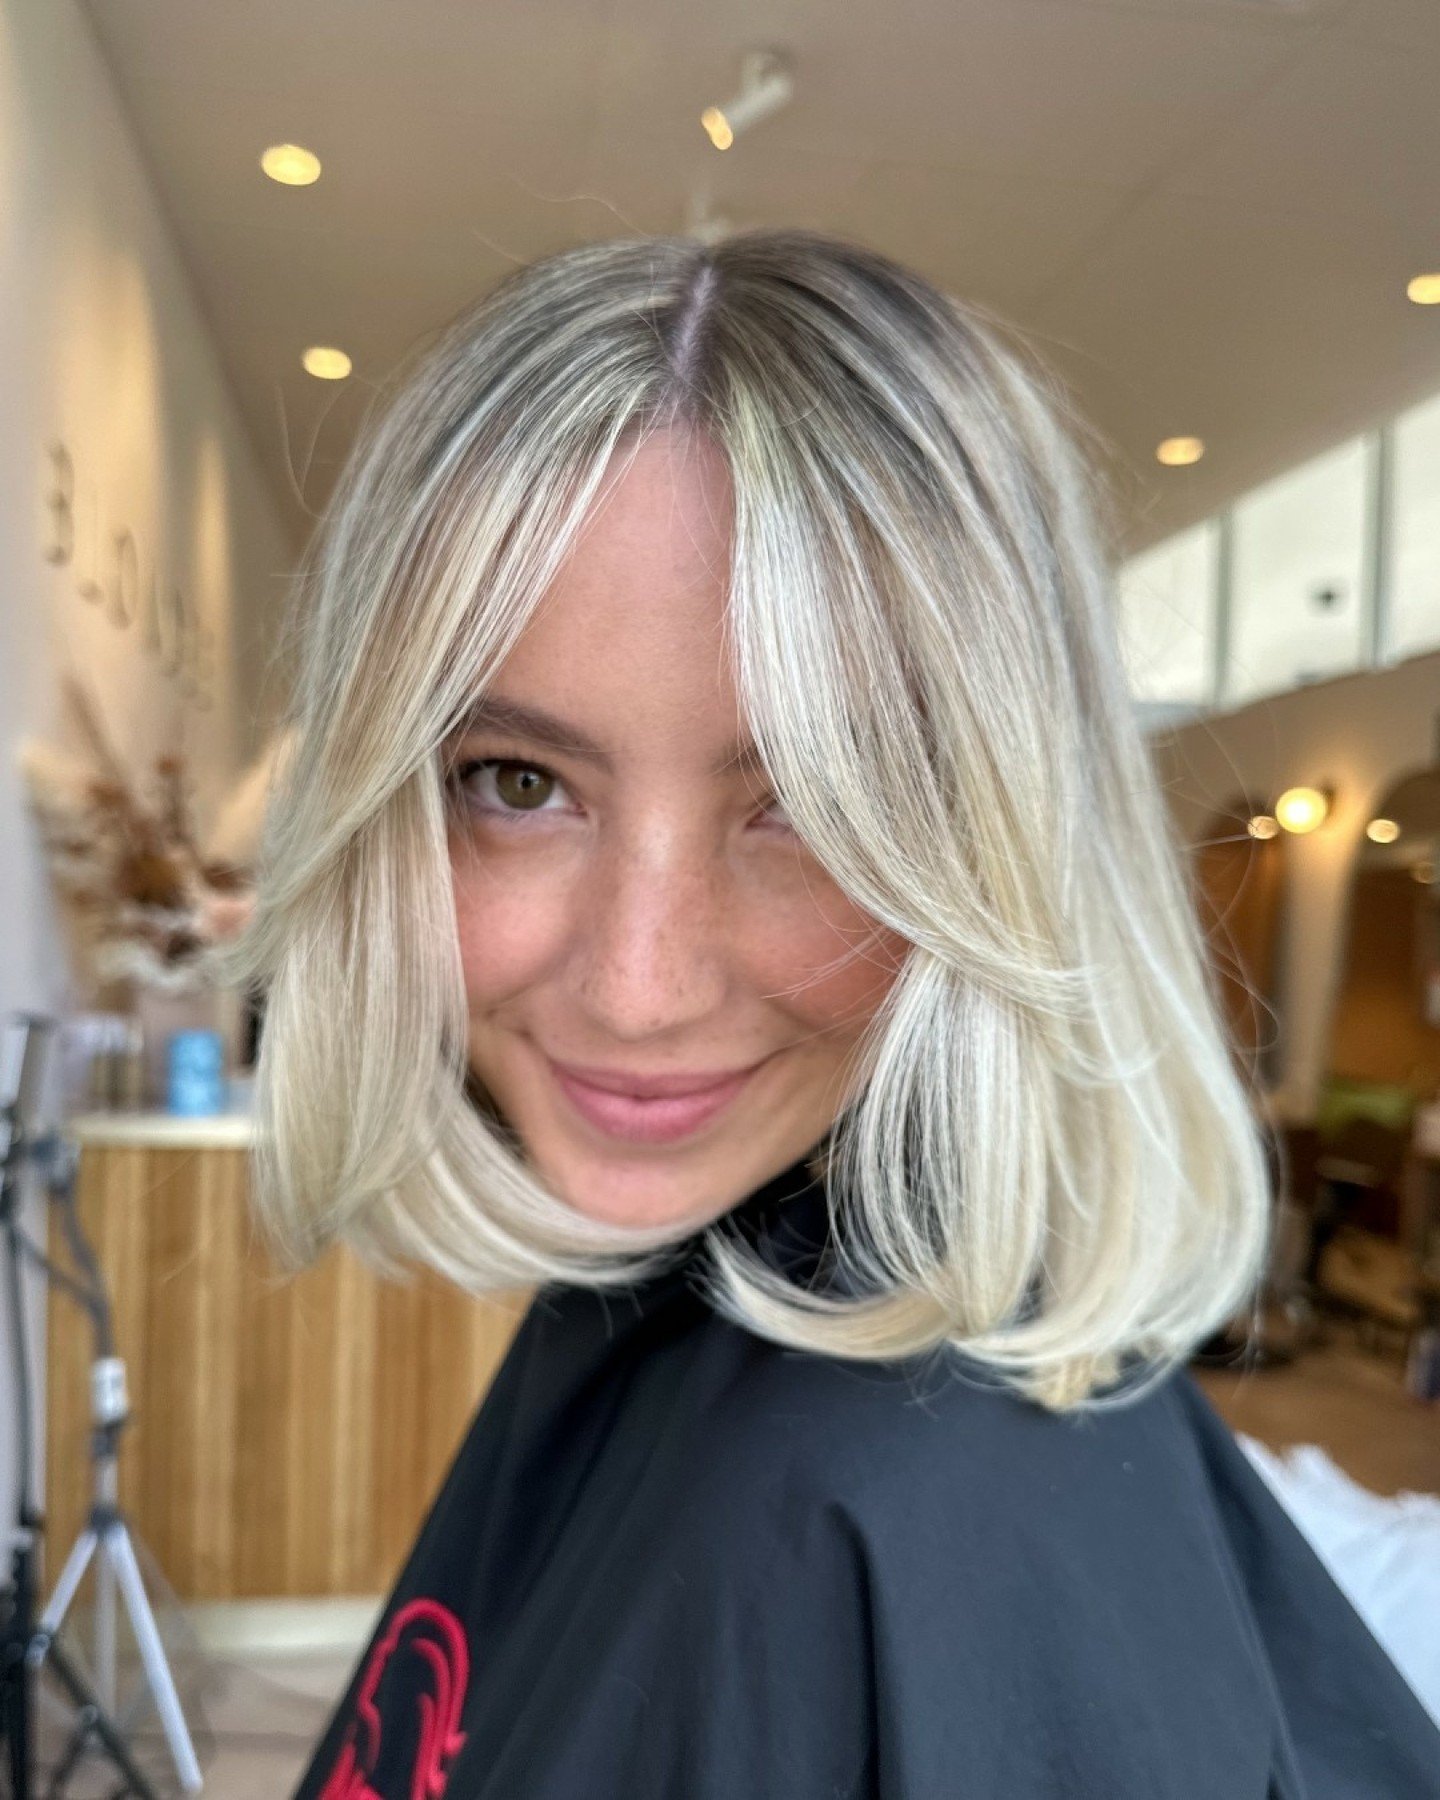 OK NEW OBSESSION 〰️ Bouncy bobs!?!?! 🤍 @cat_blondee this style is everythingggg 😮&zwj;💨✨

#WellaProANZ #AskForWella #WellaSalon #WellaPassionistasANZ  #brisbanesalon #brisbanehairstylist #blondehair #wellahair #brightblonde #creamyblonde #blondebo